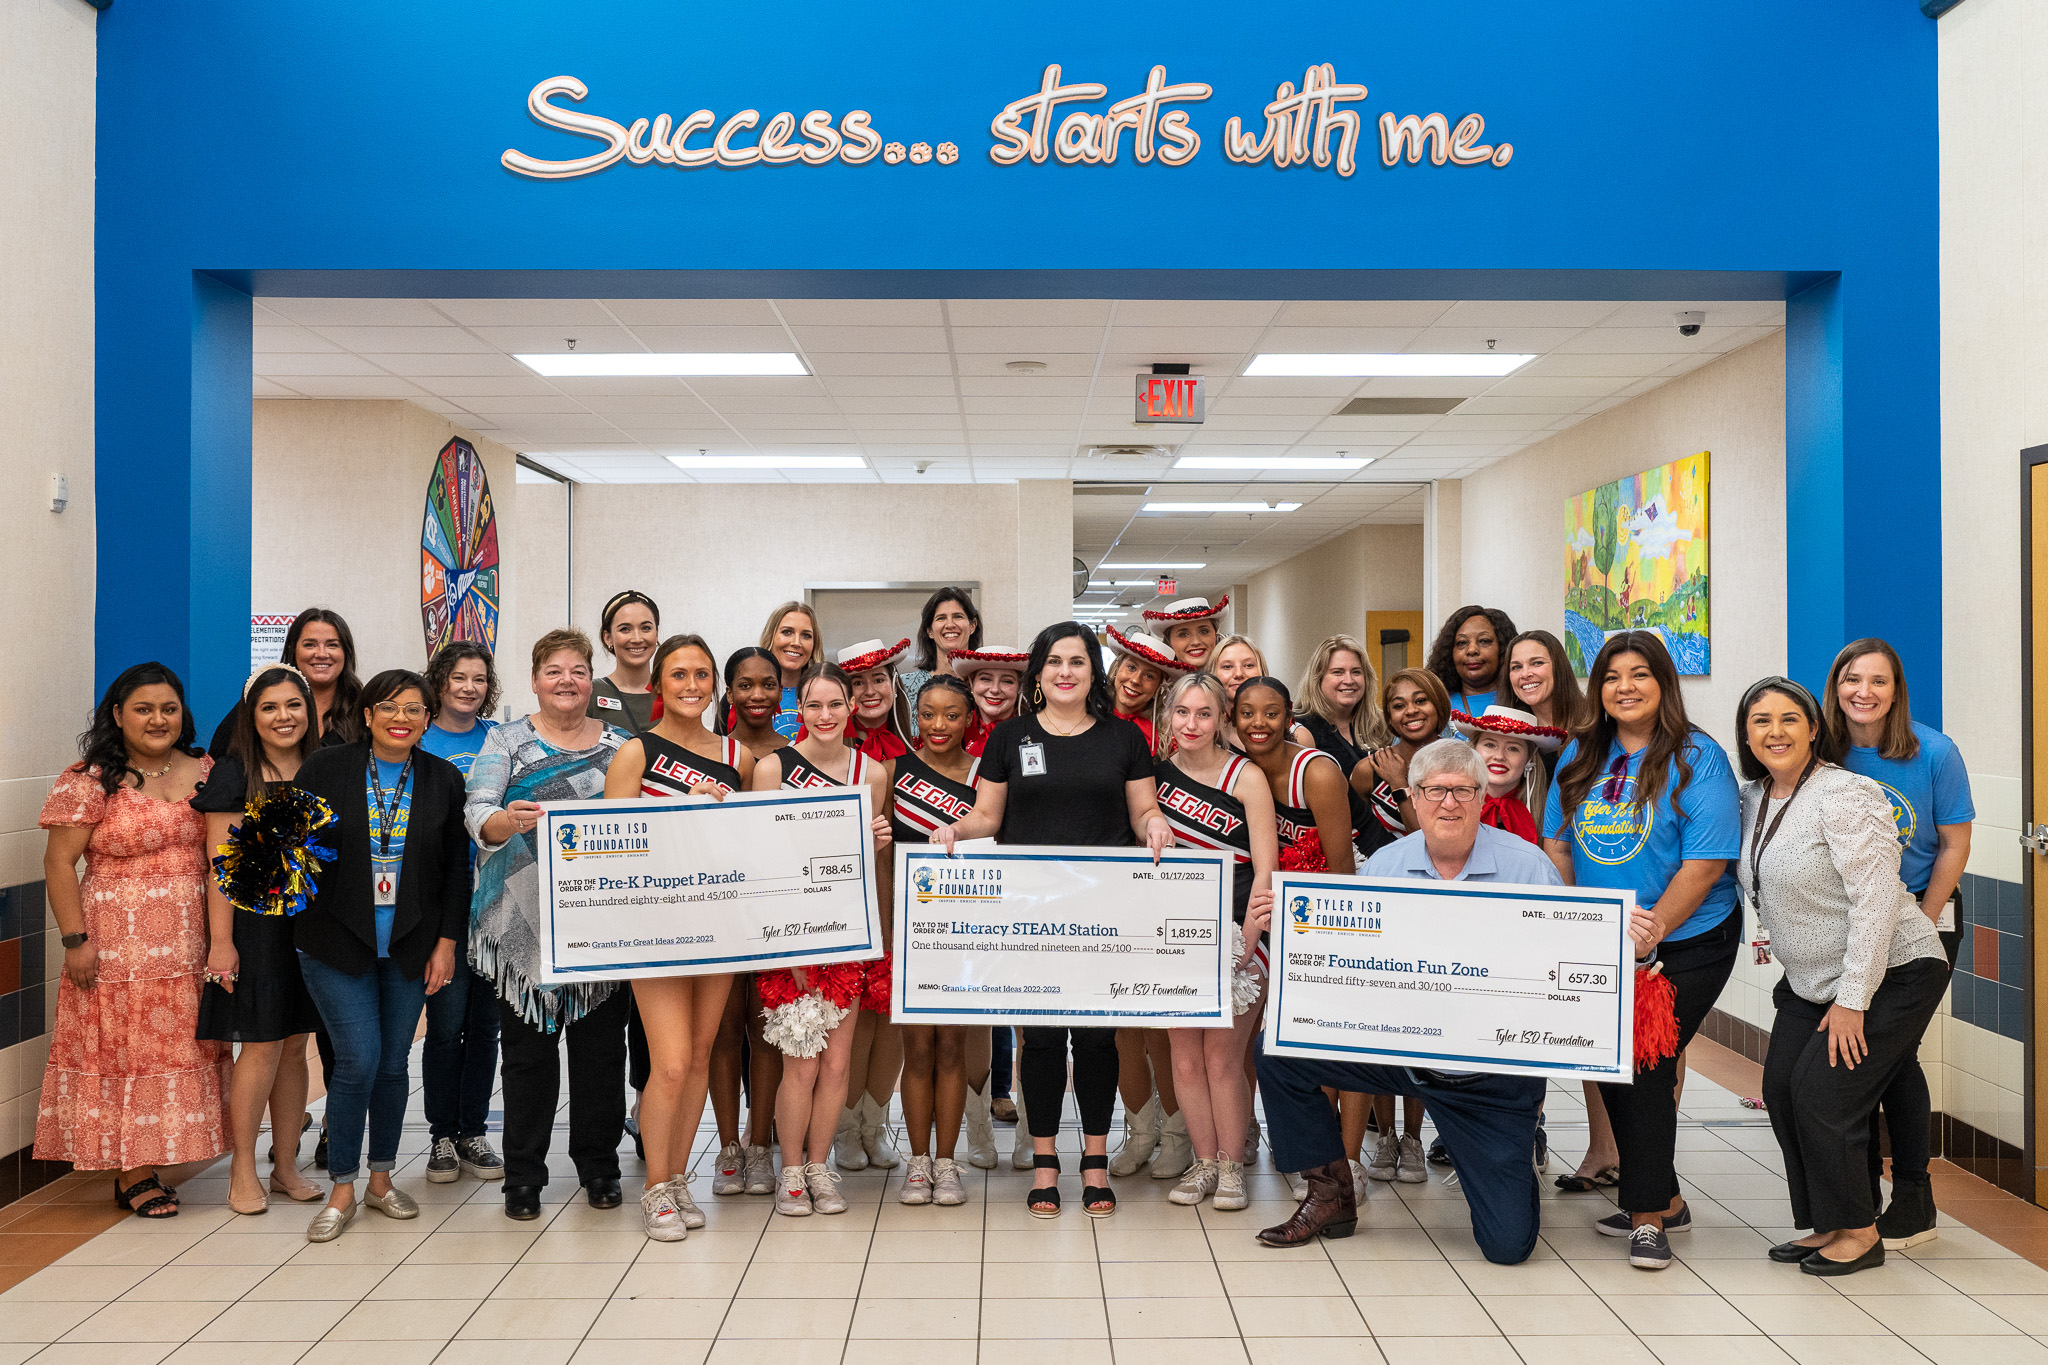 adults standing in a hallway with cheerleaders holding giant checks for grants